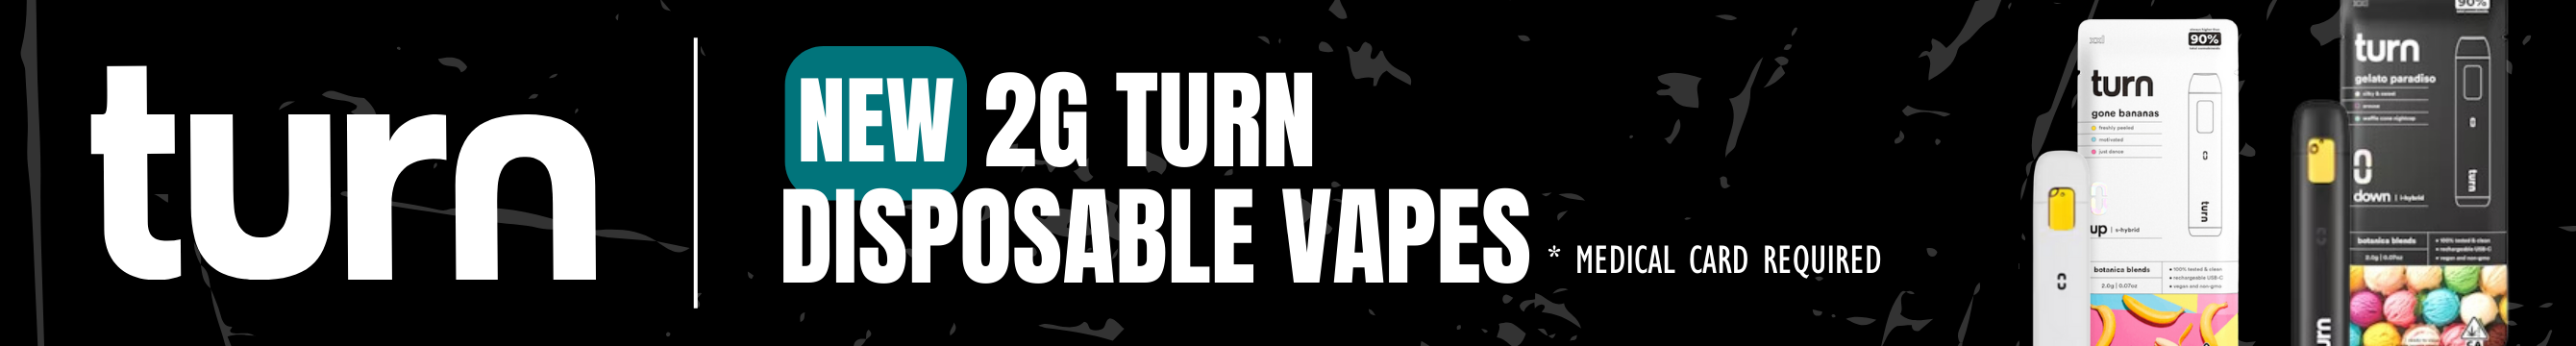 New 2g Vapes from Turn